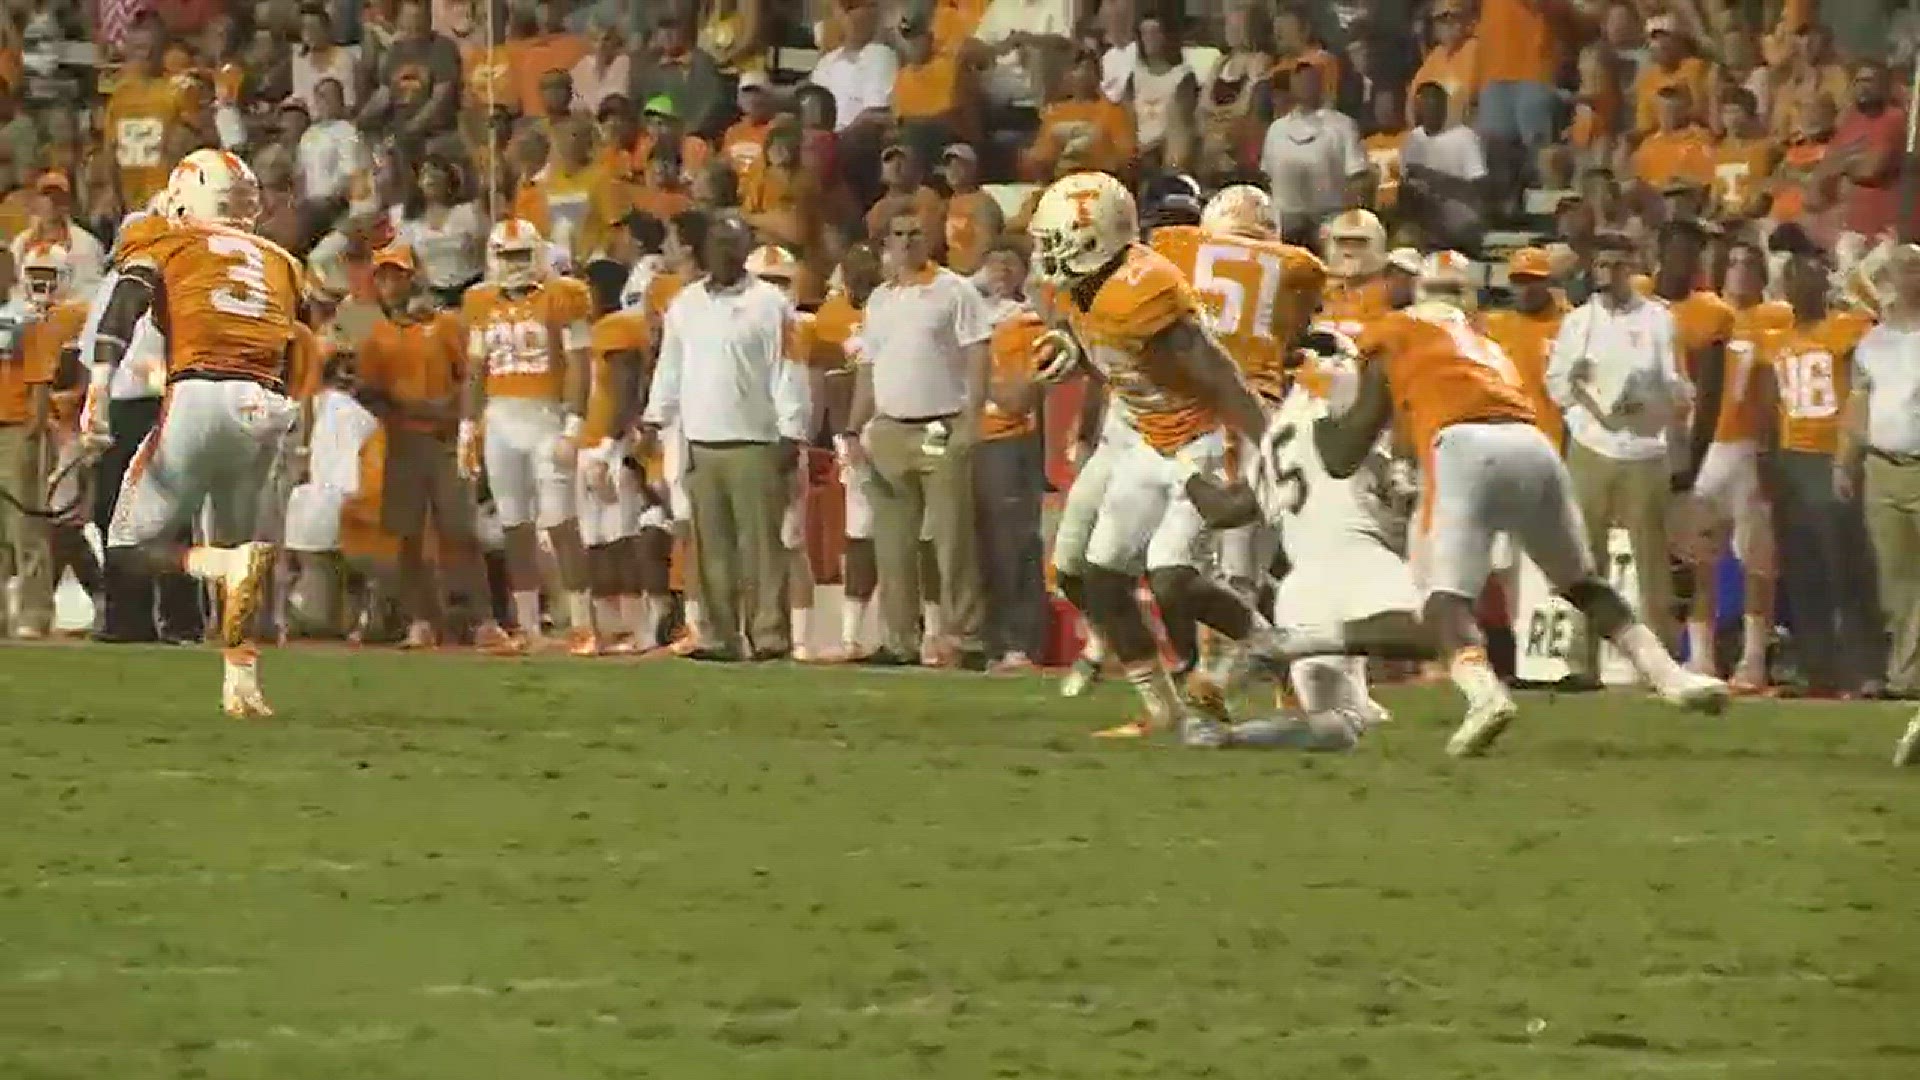 Butch Jones announced on Monday that Evan Berry's season is over due to injury. Relive his four career kick return touchdowns in this video.